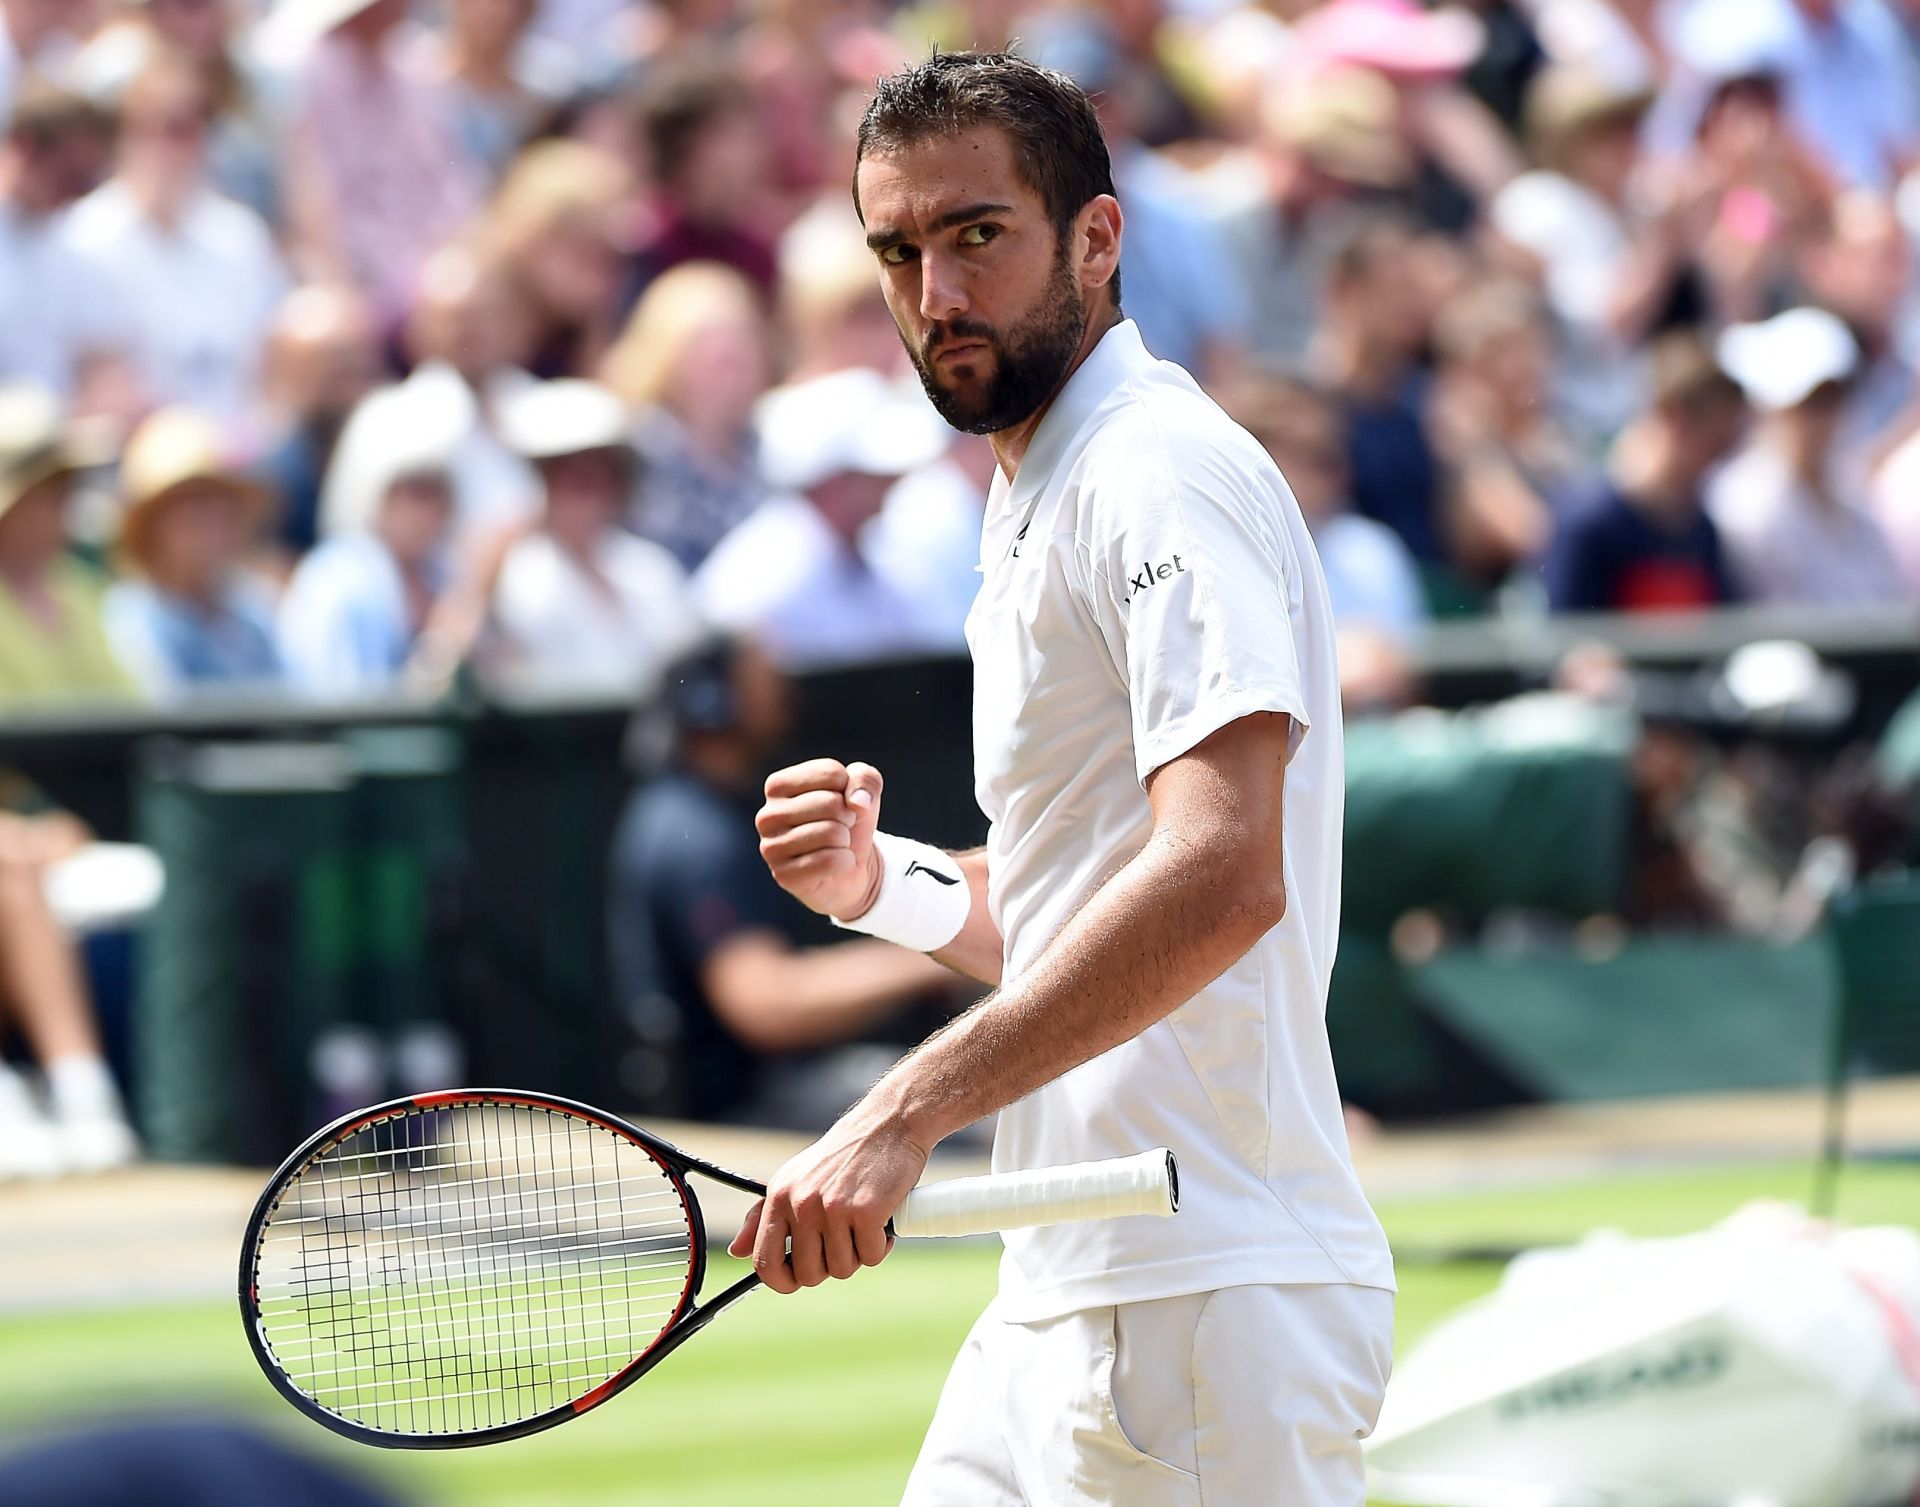 epa05410843 Marin Cilic of Croatia scores against Roger Federer of Switzerland in their quarter final match during the Wimbledon Championships at the All England Lawn Tennis Club, in London, Britain, 06 July 2016.  EPA/ANDY RAIN EDITORIAL USE ONLY/NO COMMERCIAL SALES